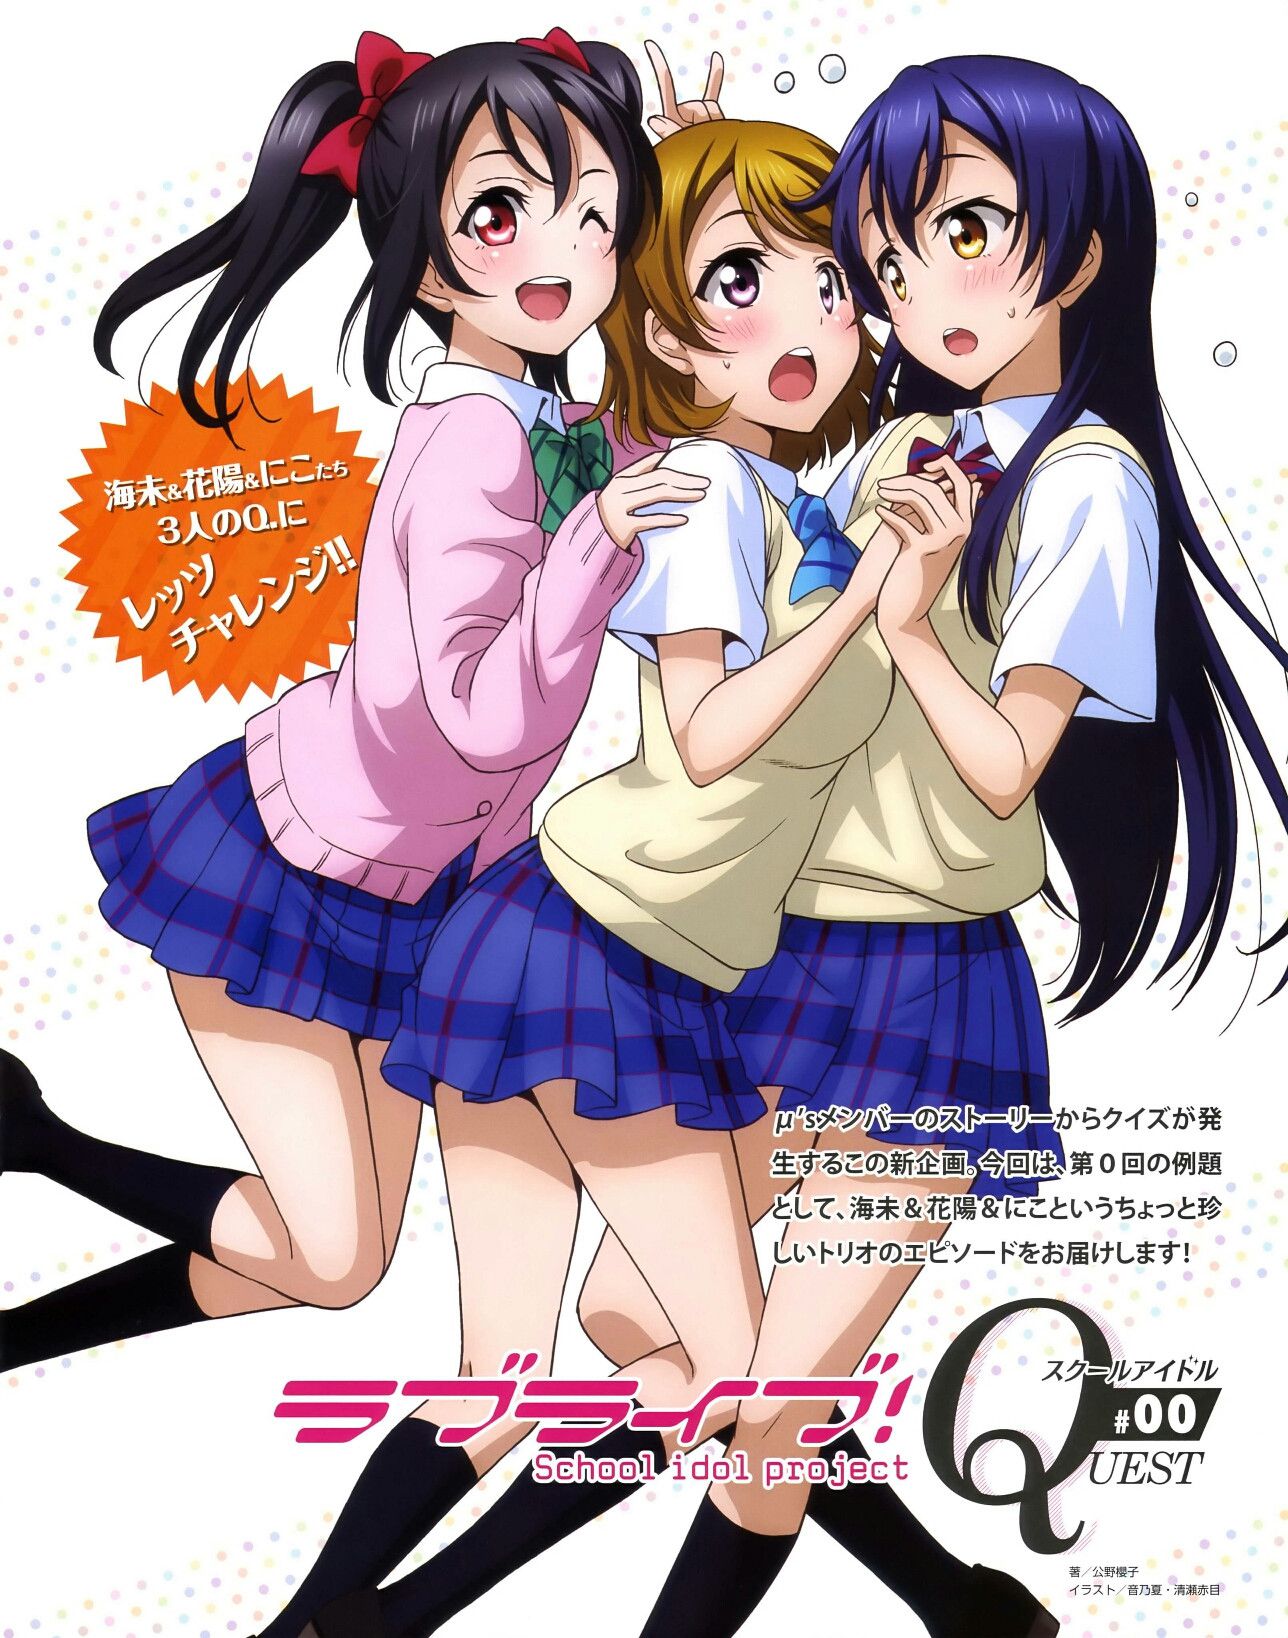 [Goddess images] "love live! "Of or's Chin as erotic pretty unspectacular as good girls become mothers is not www 3